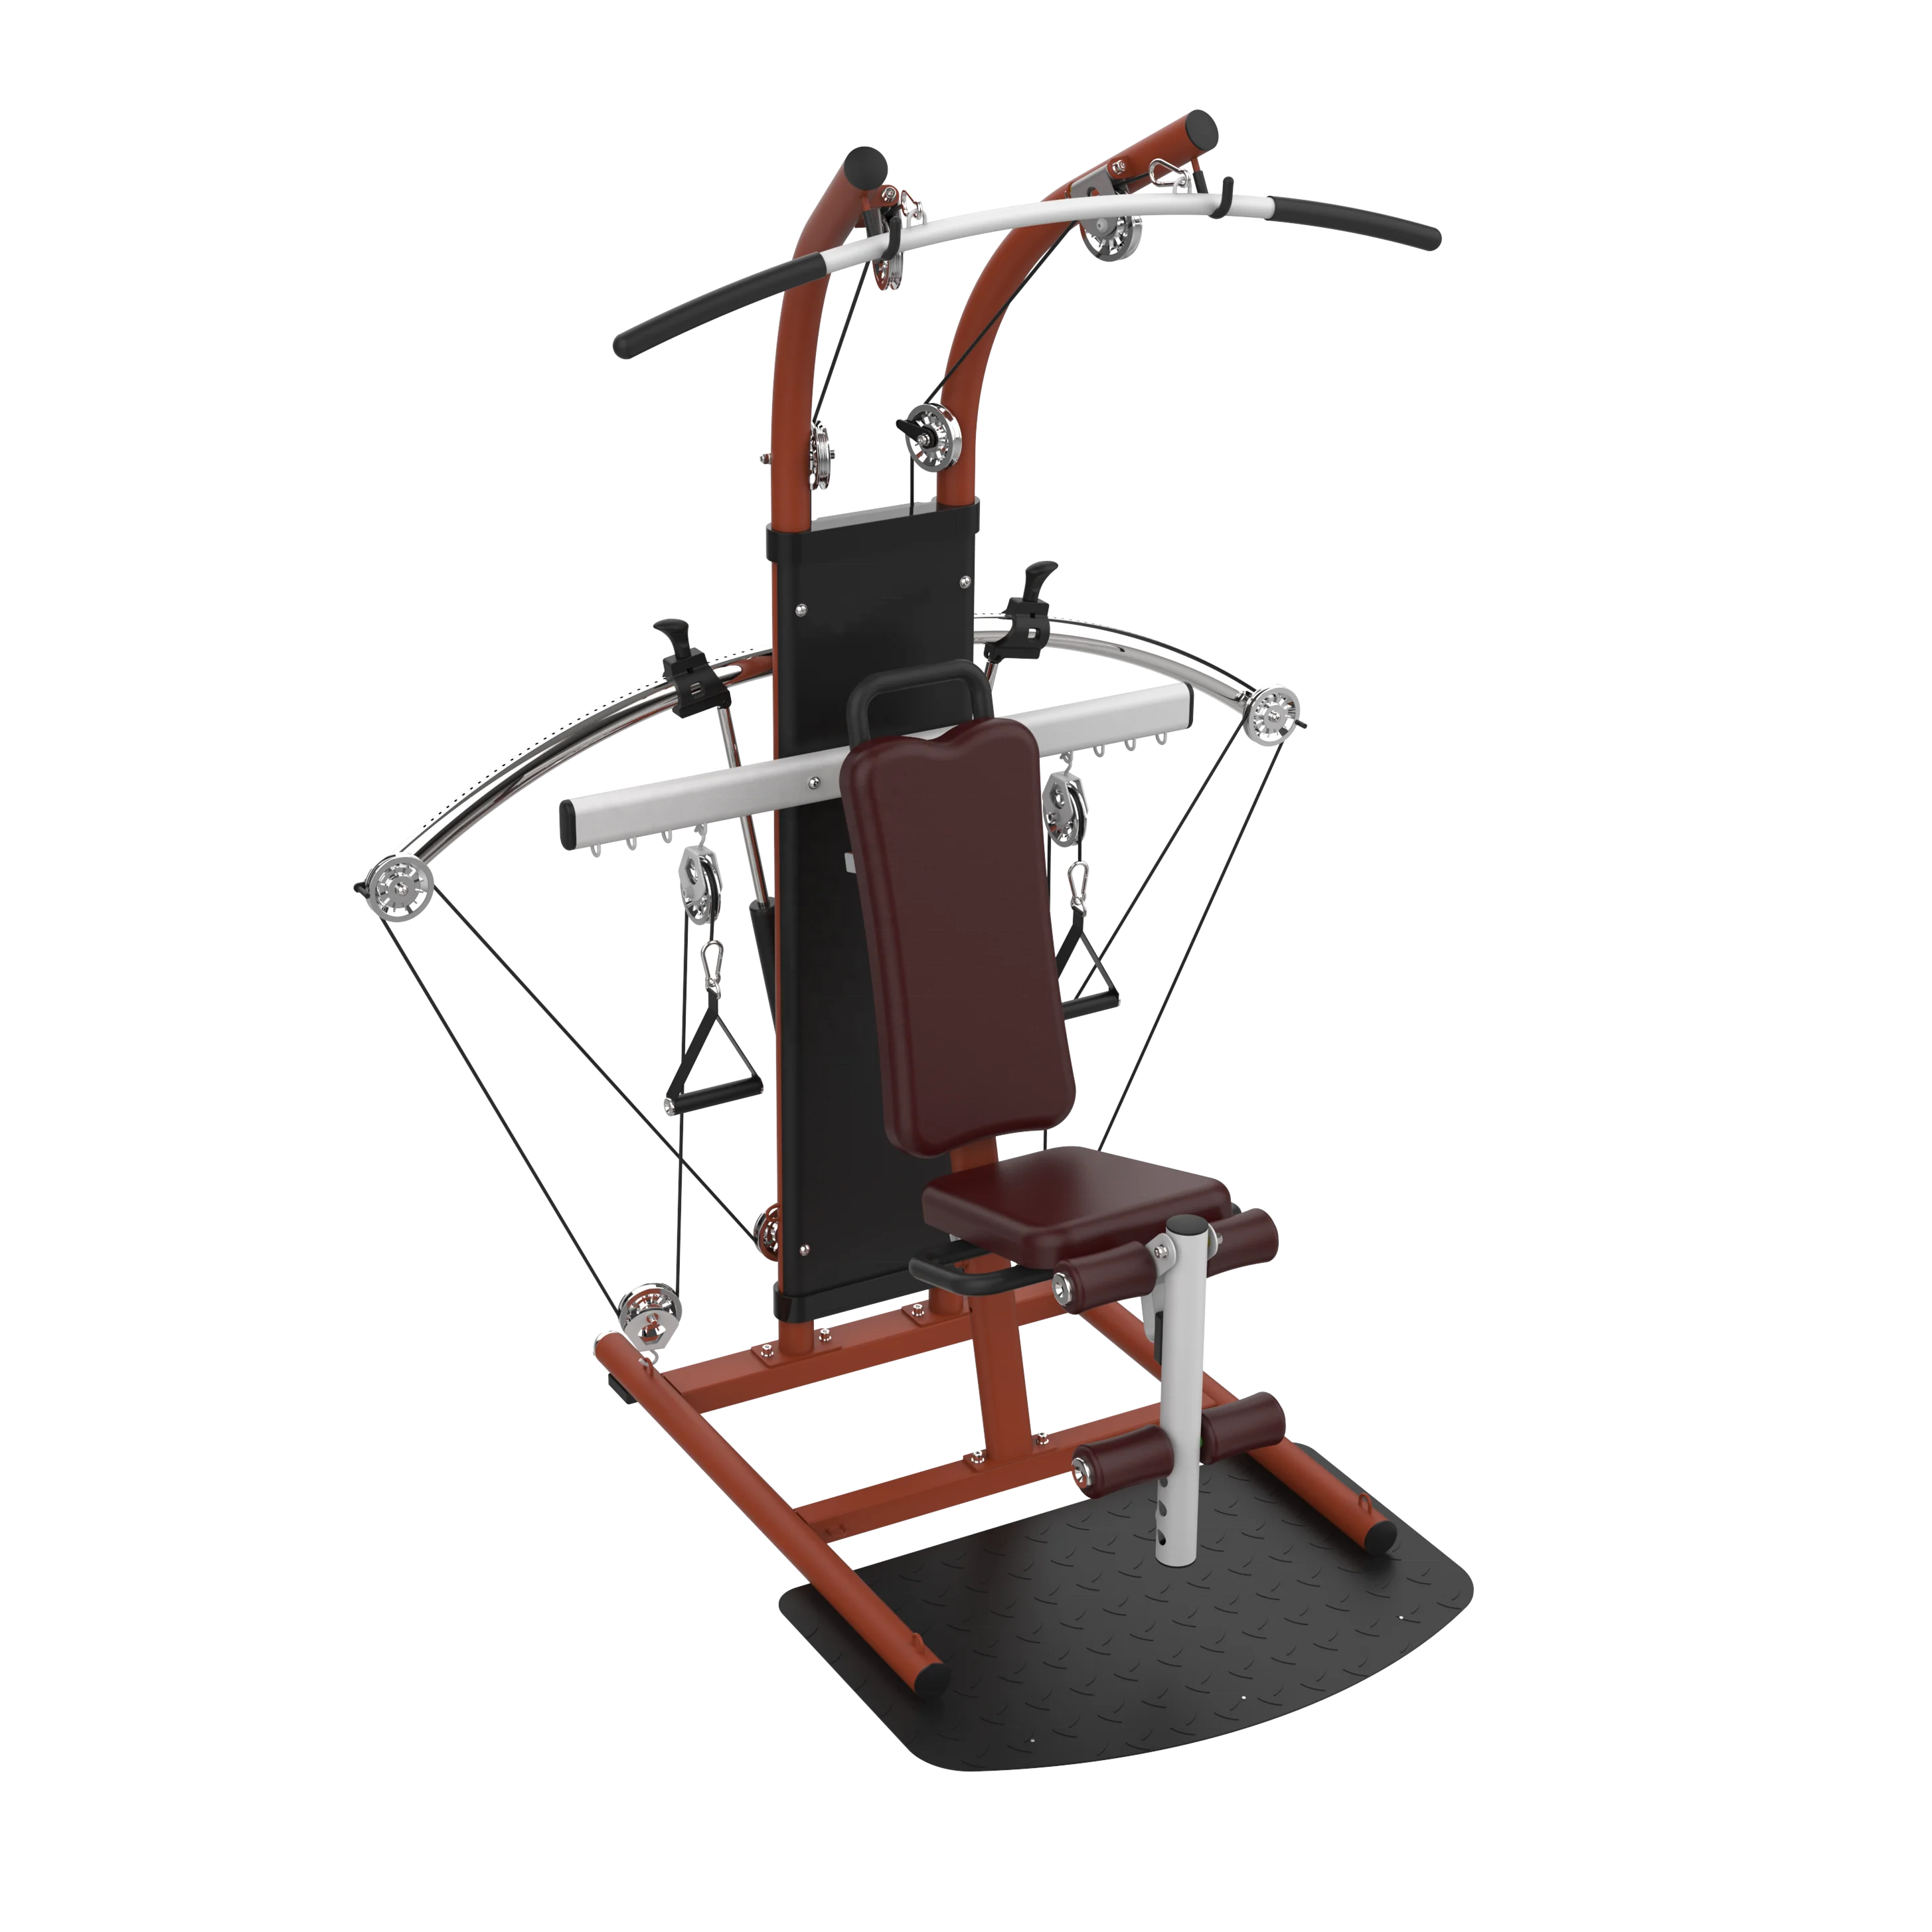 

2022 Fitness multi functional pneumatic integrated trainer for both commercial and home use